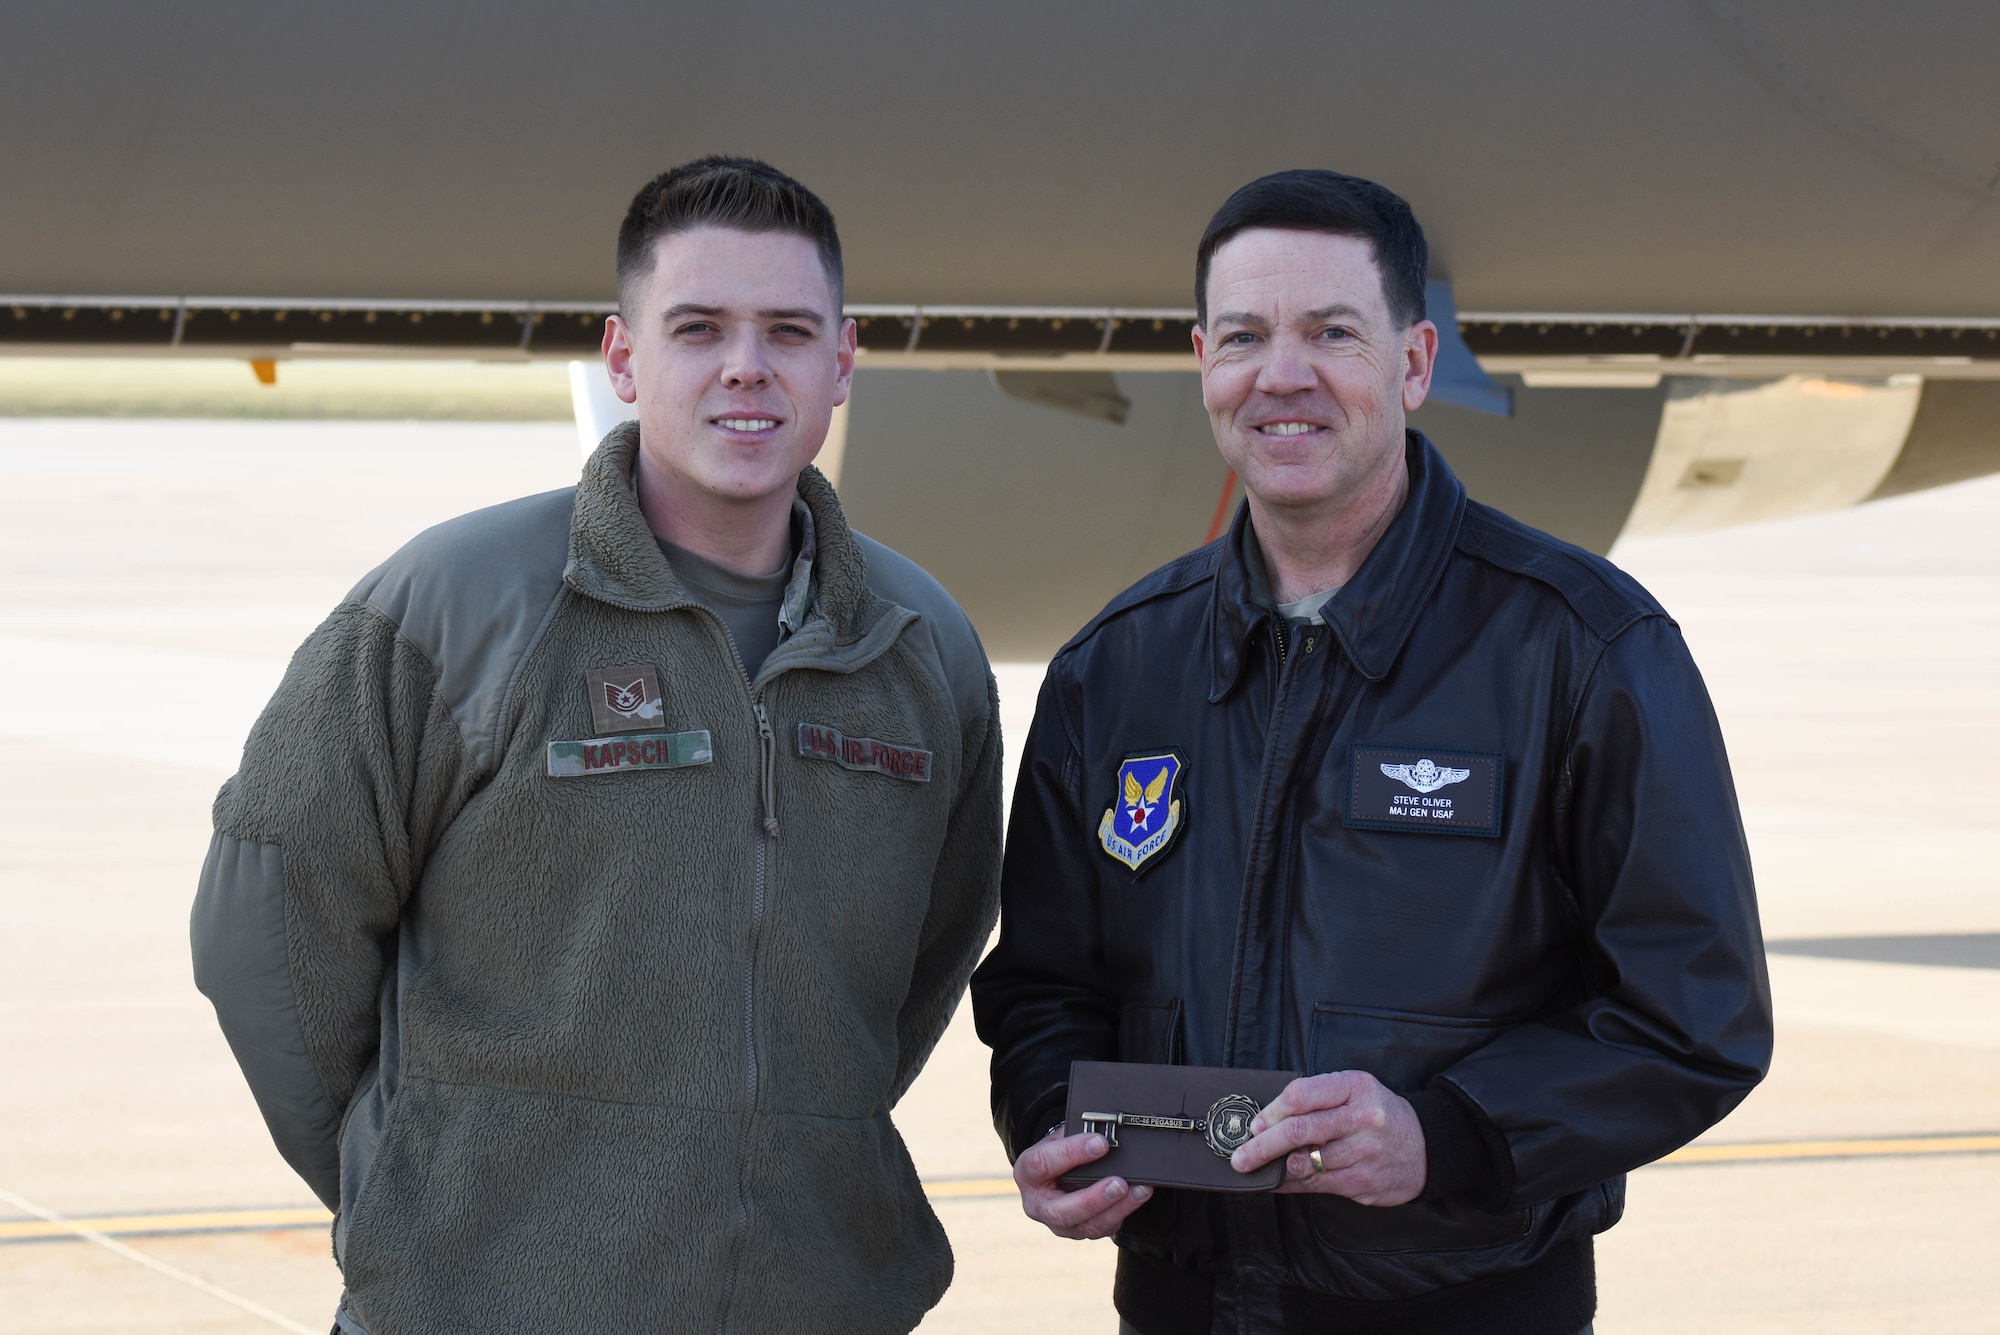 Maj. Gen. Stephen Oliver Jr., International Affairs assistant deputy under secretary of the Air Force, receives the aircraft key from Tech. Sgt. Justin Kapsch, 931st Aircraft Maintenance Squadron aerospace maintenance craftsman, Nov. 1, 2019, at McConnell Air Force Base, Kan. McConnell has now received 16 KC-46A Pegasus. (U.S. Air Force photo by Airman 1st Class Marc A. Garcia)